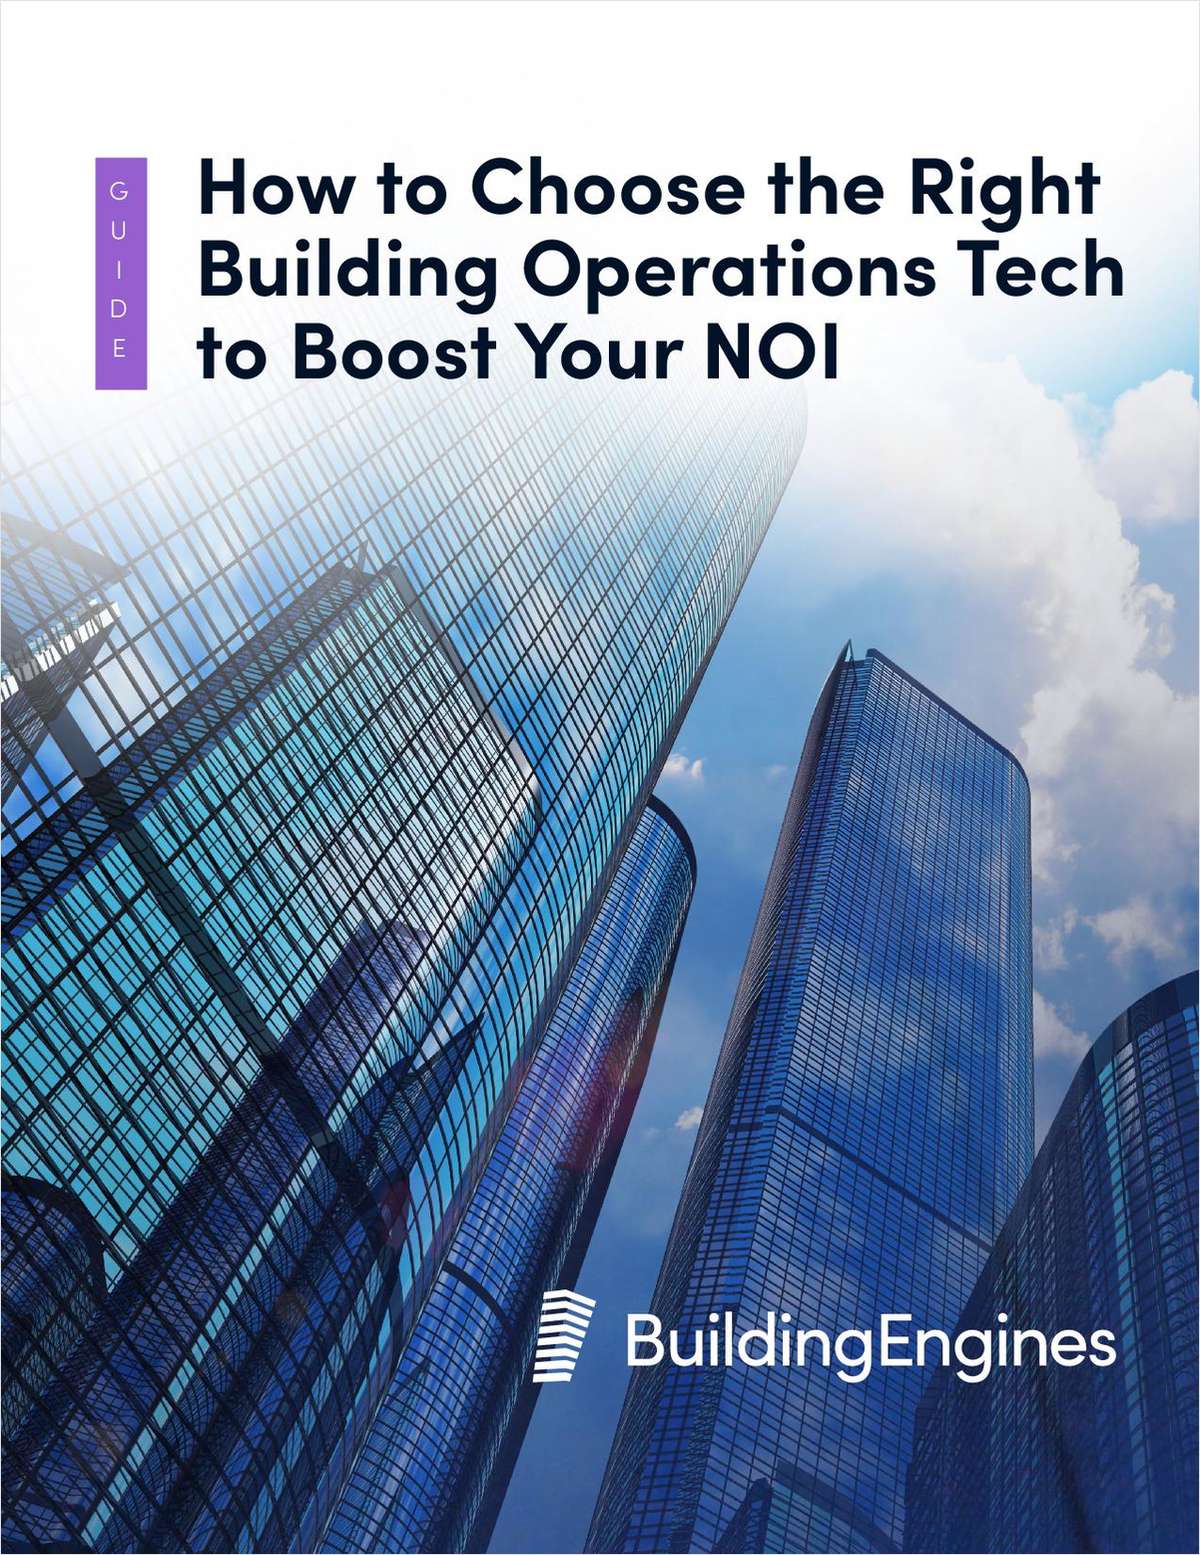 How to Choose the Right Building Operations Tech to Boost Your NOI